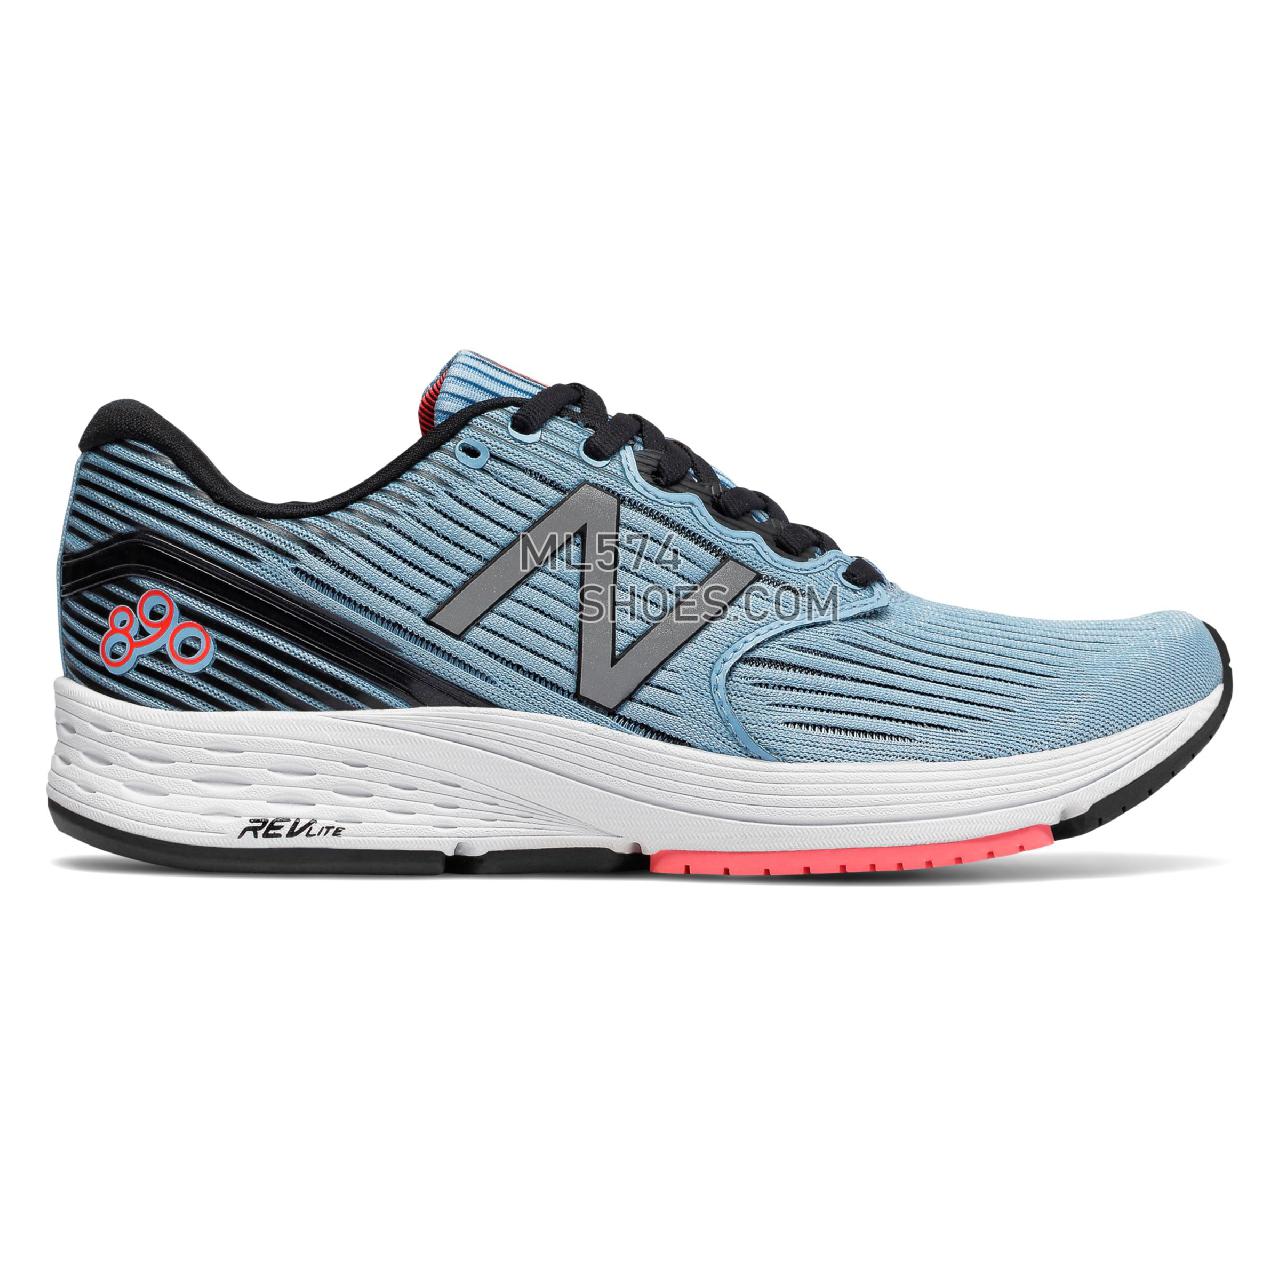 New Balance 890v6 - Women's 890 - Running Clear Sky with Coral and Black - W890LB6